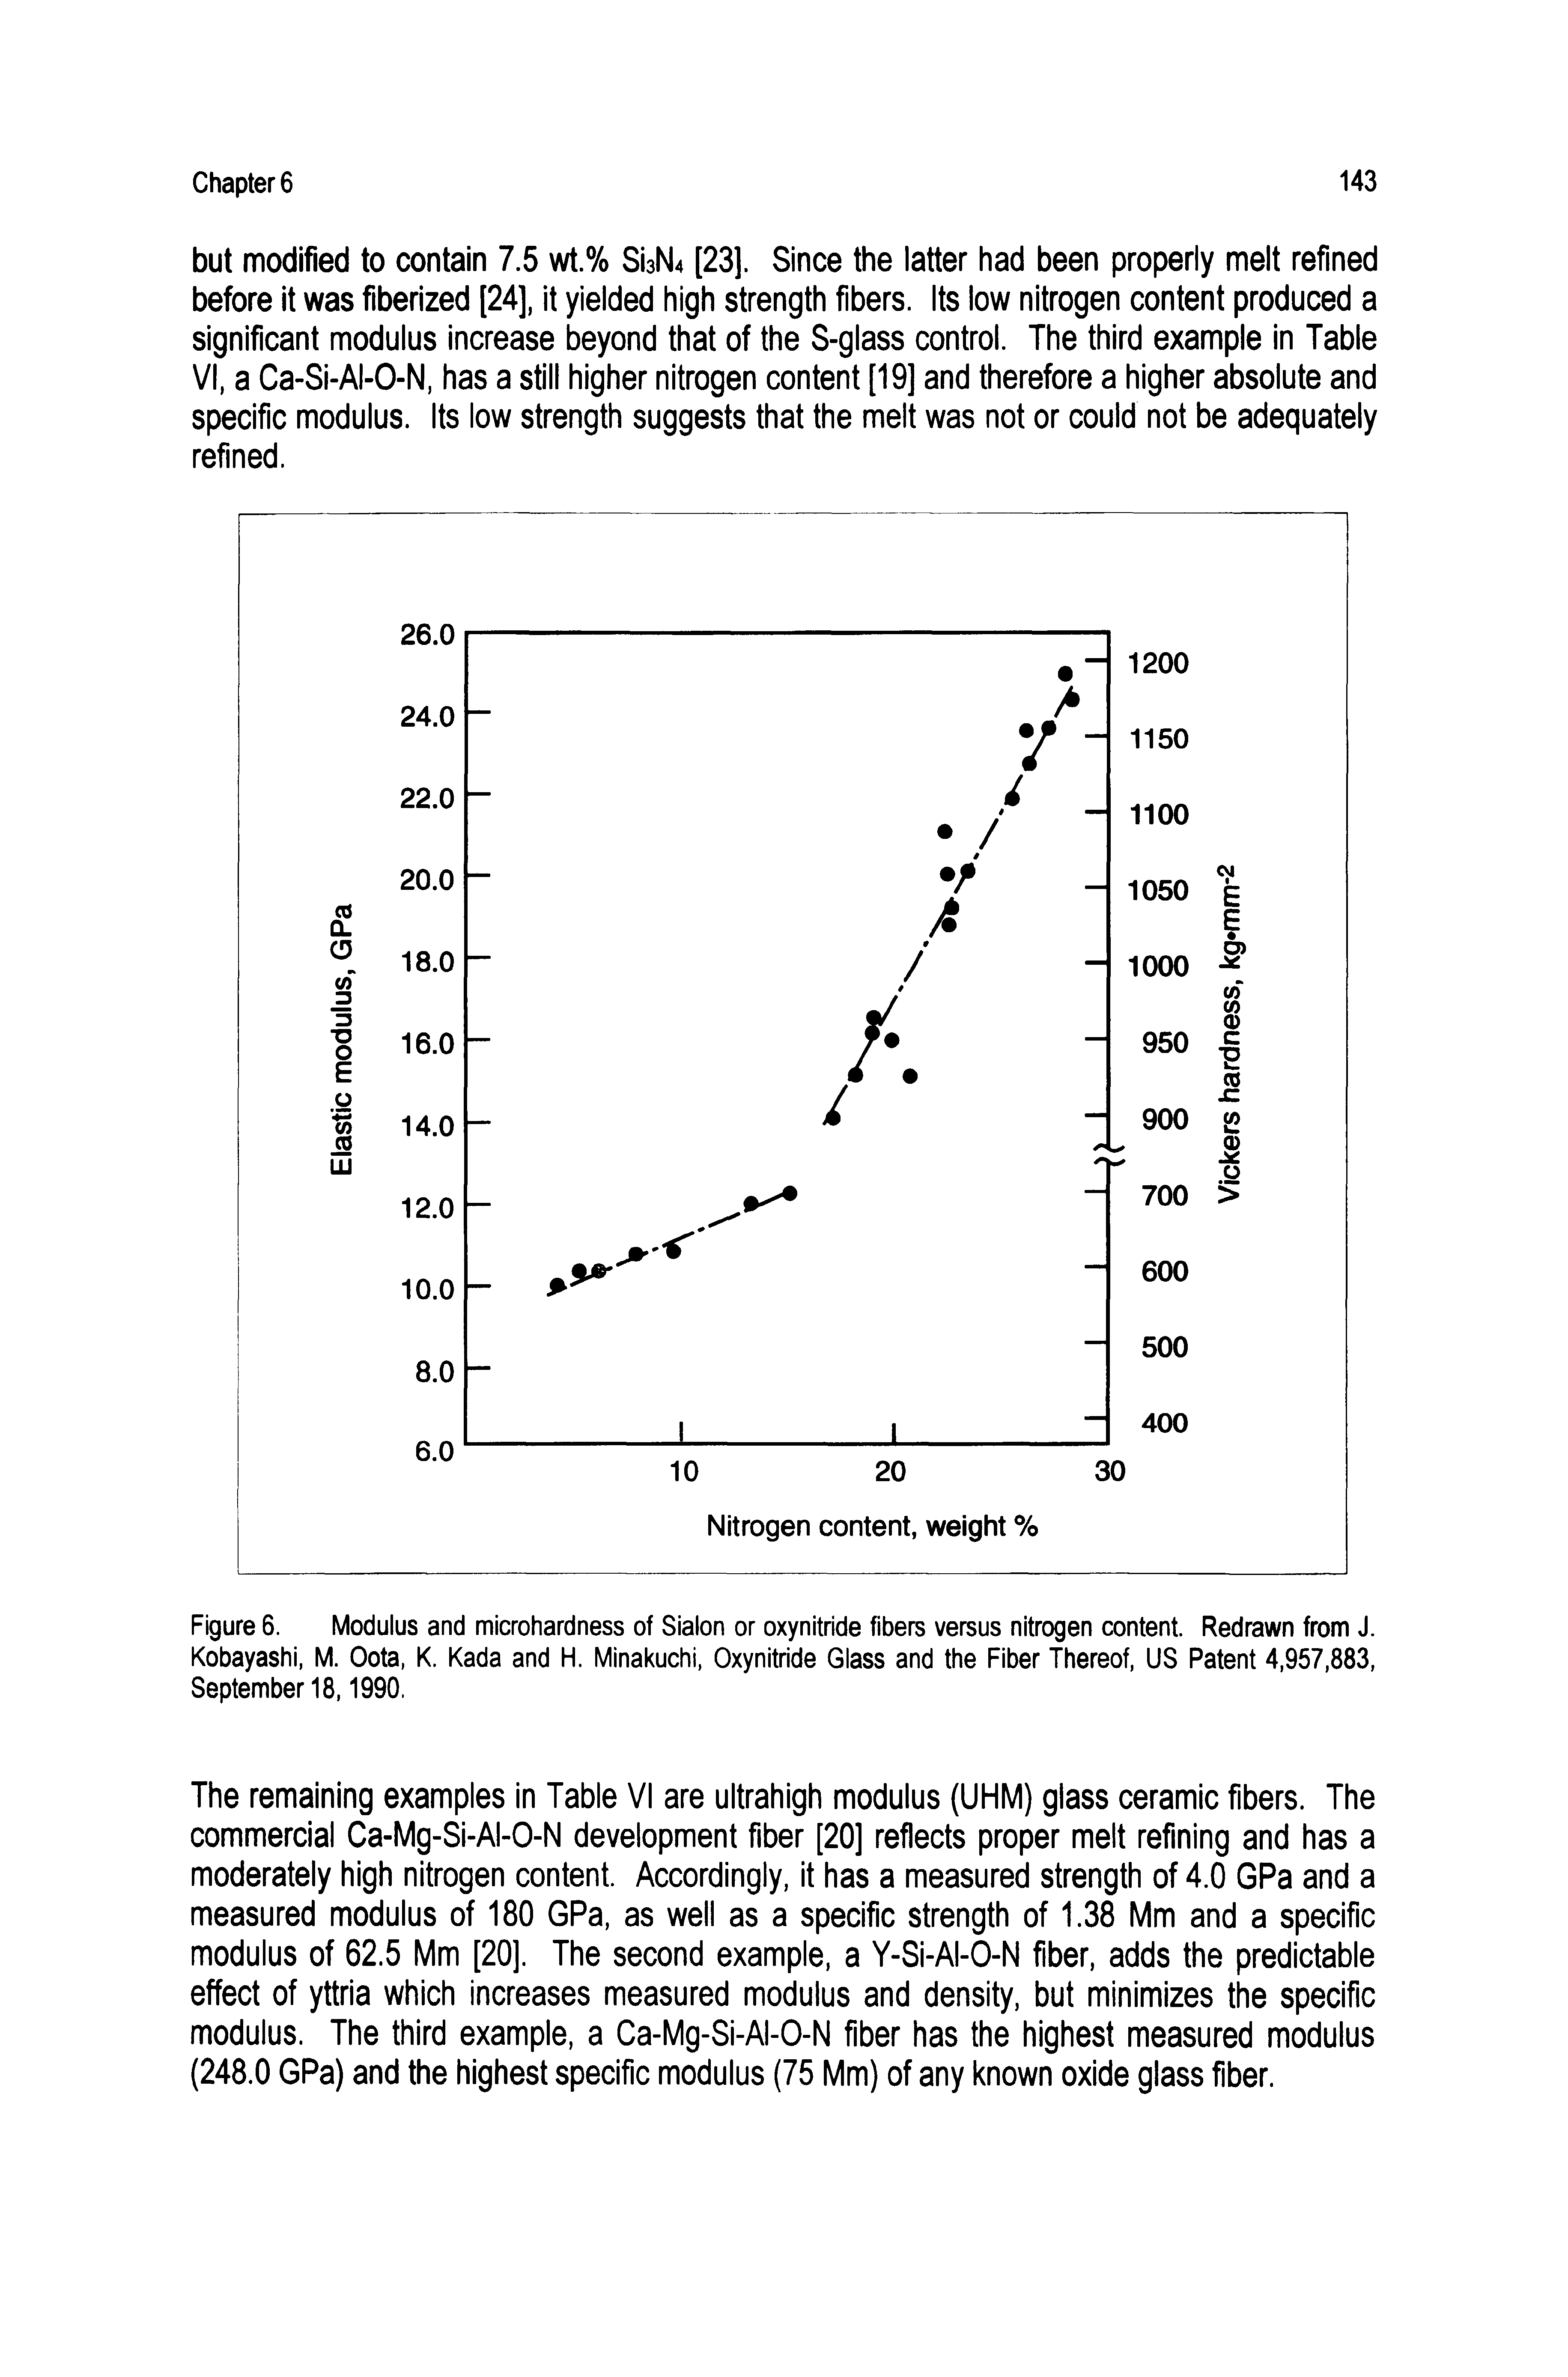 Figure 6. Modulus and microhardness of Sialon or oxynitride fibers versus nitrogen content. Redrawn from J. Kobayashi, M. Oota, K. Kada and H. Minakuchi, Oxynitride Glass and the Fiber Thereof, US Patent 4,957,883, September 18,1990.